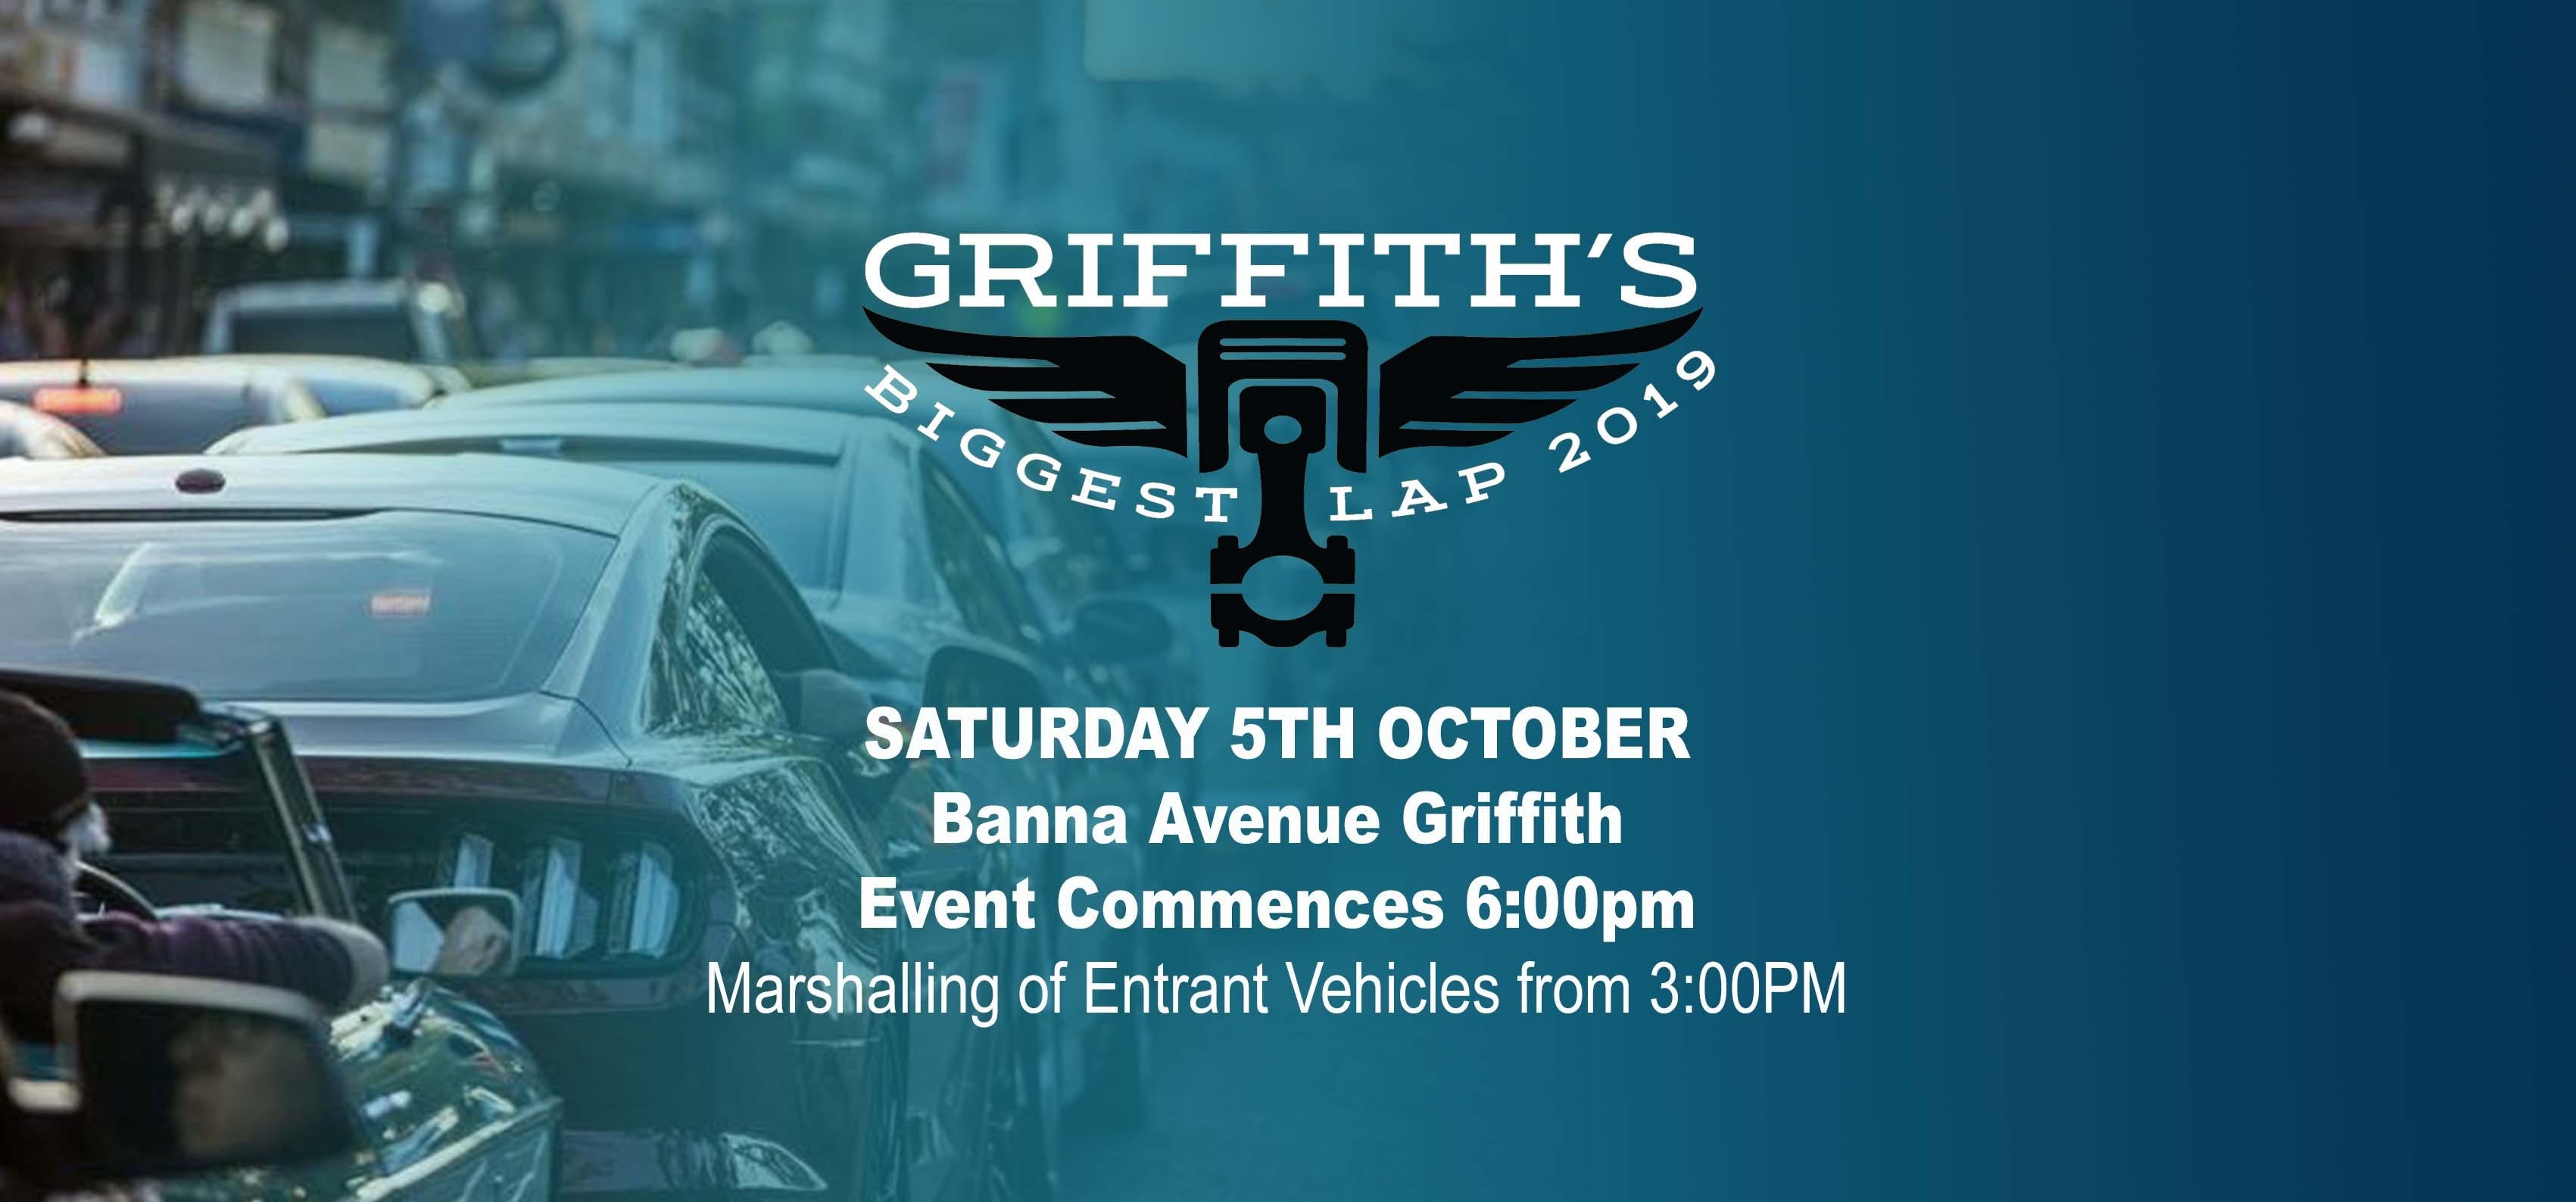 Griffith's Biggest Lap - Accommodation Bookings